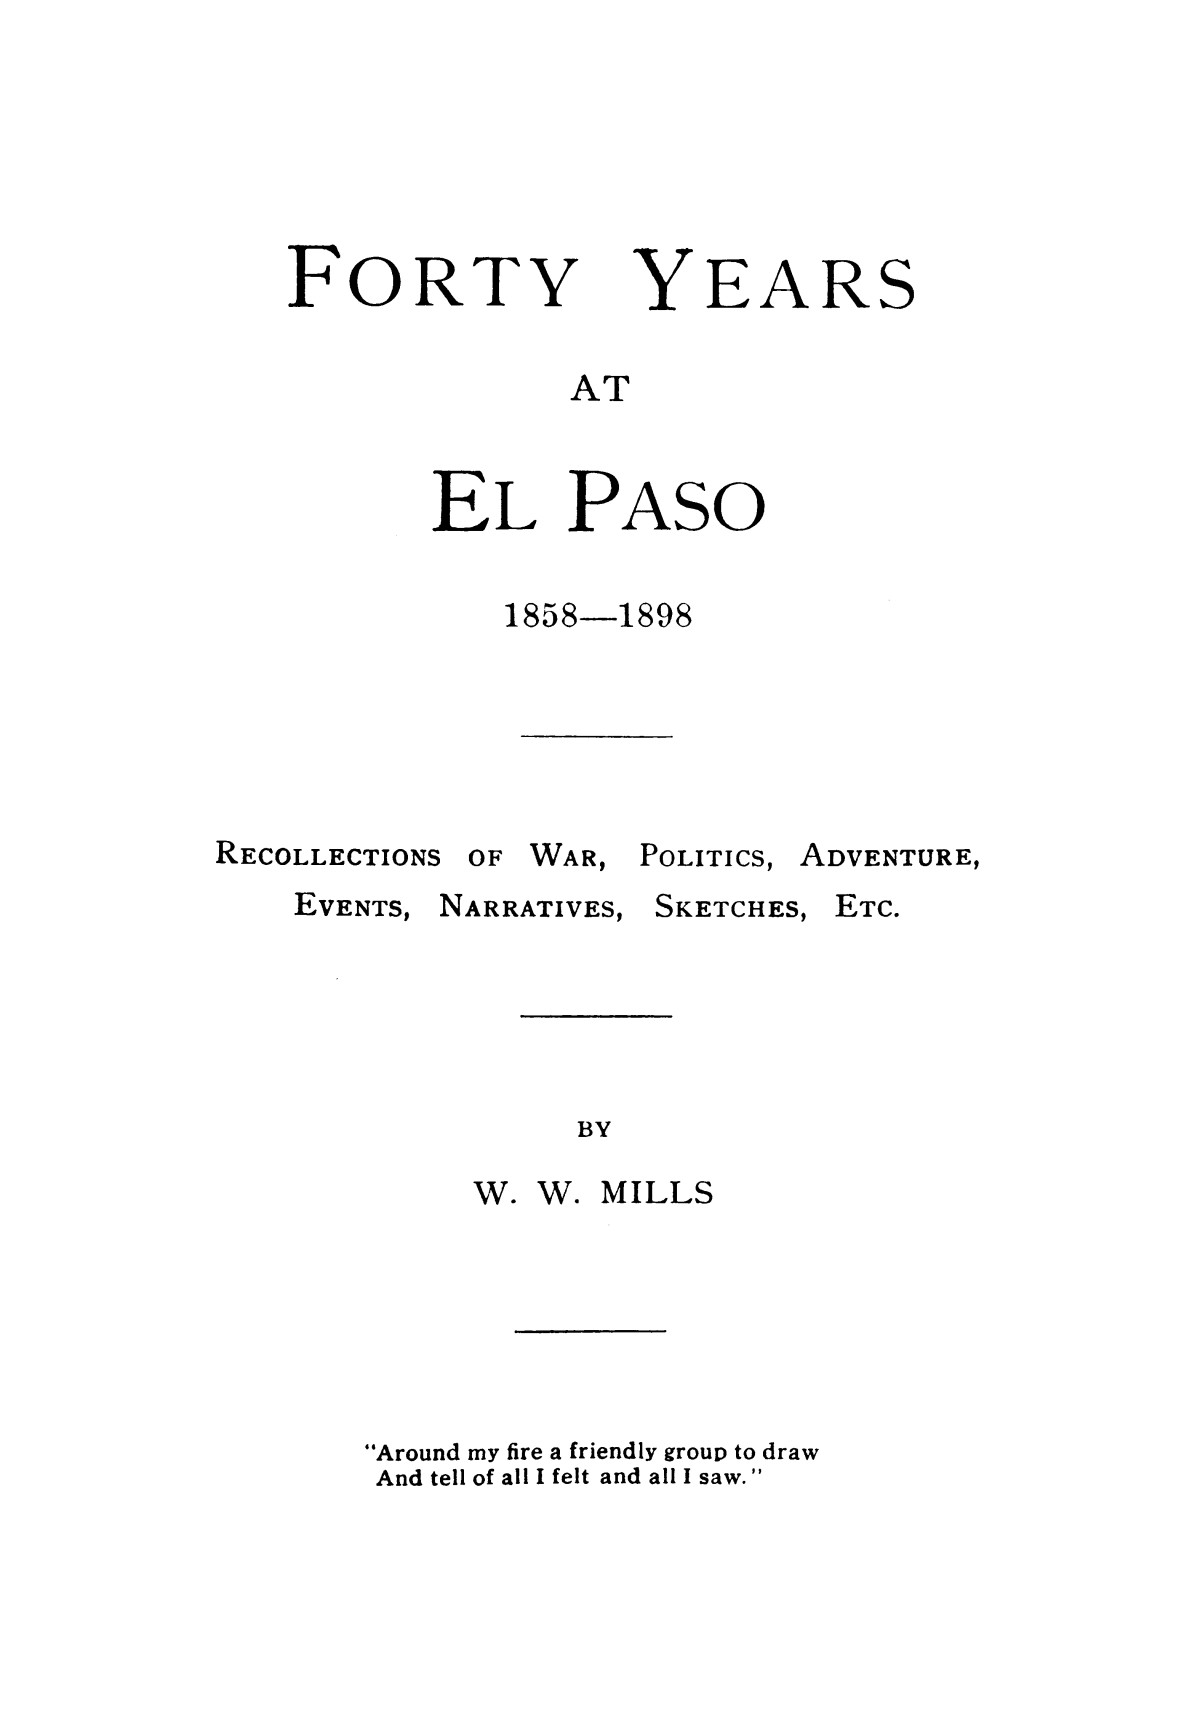 Forty years at El Paso, 1858-1898; recollections of war, politics, adventure, events, narratives, sketches, etc., by W. W. Mills.
                                                
                                                    [Sequence #]: 1 of 163
                                                